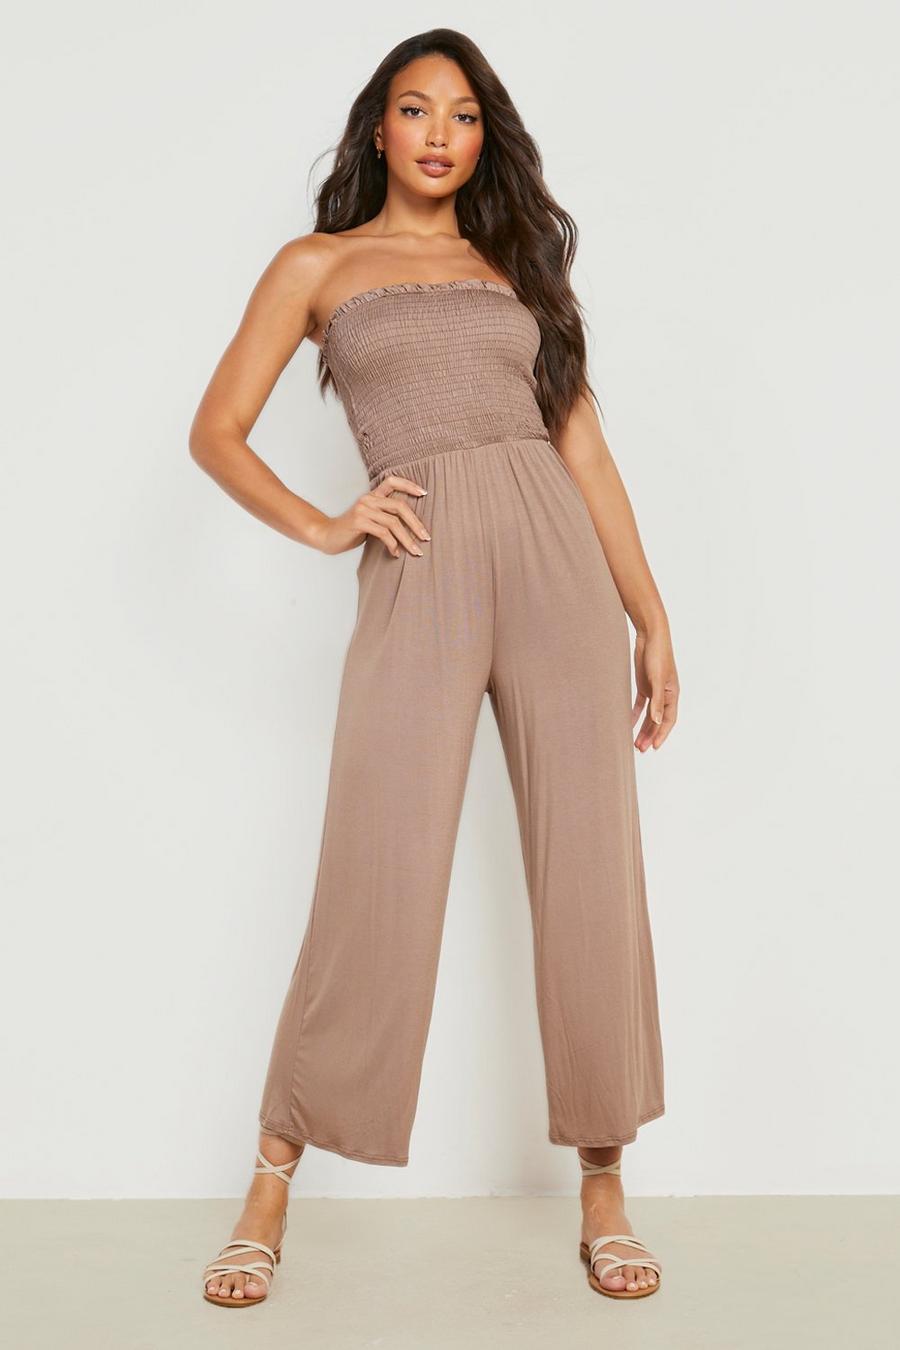 Mocha beis Tall Shirred Bandeau Culottes Jumpsuit